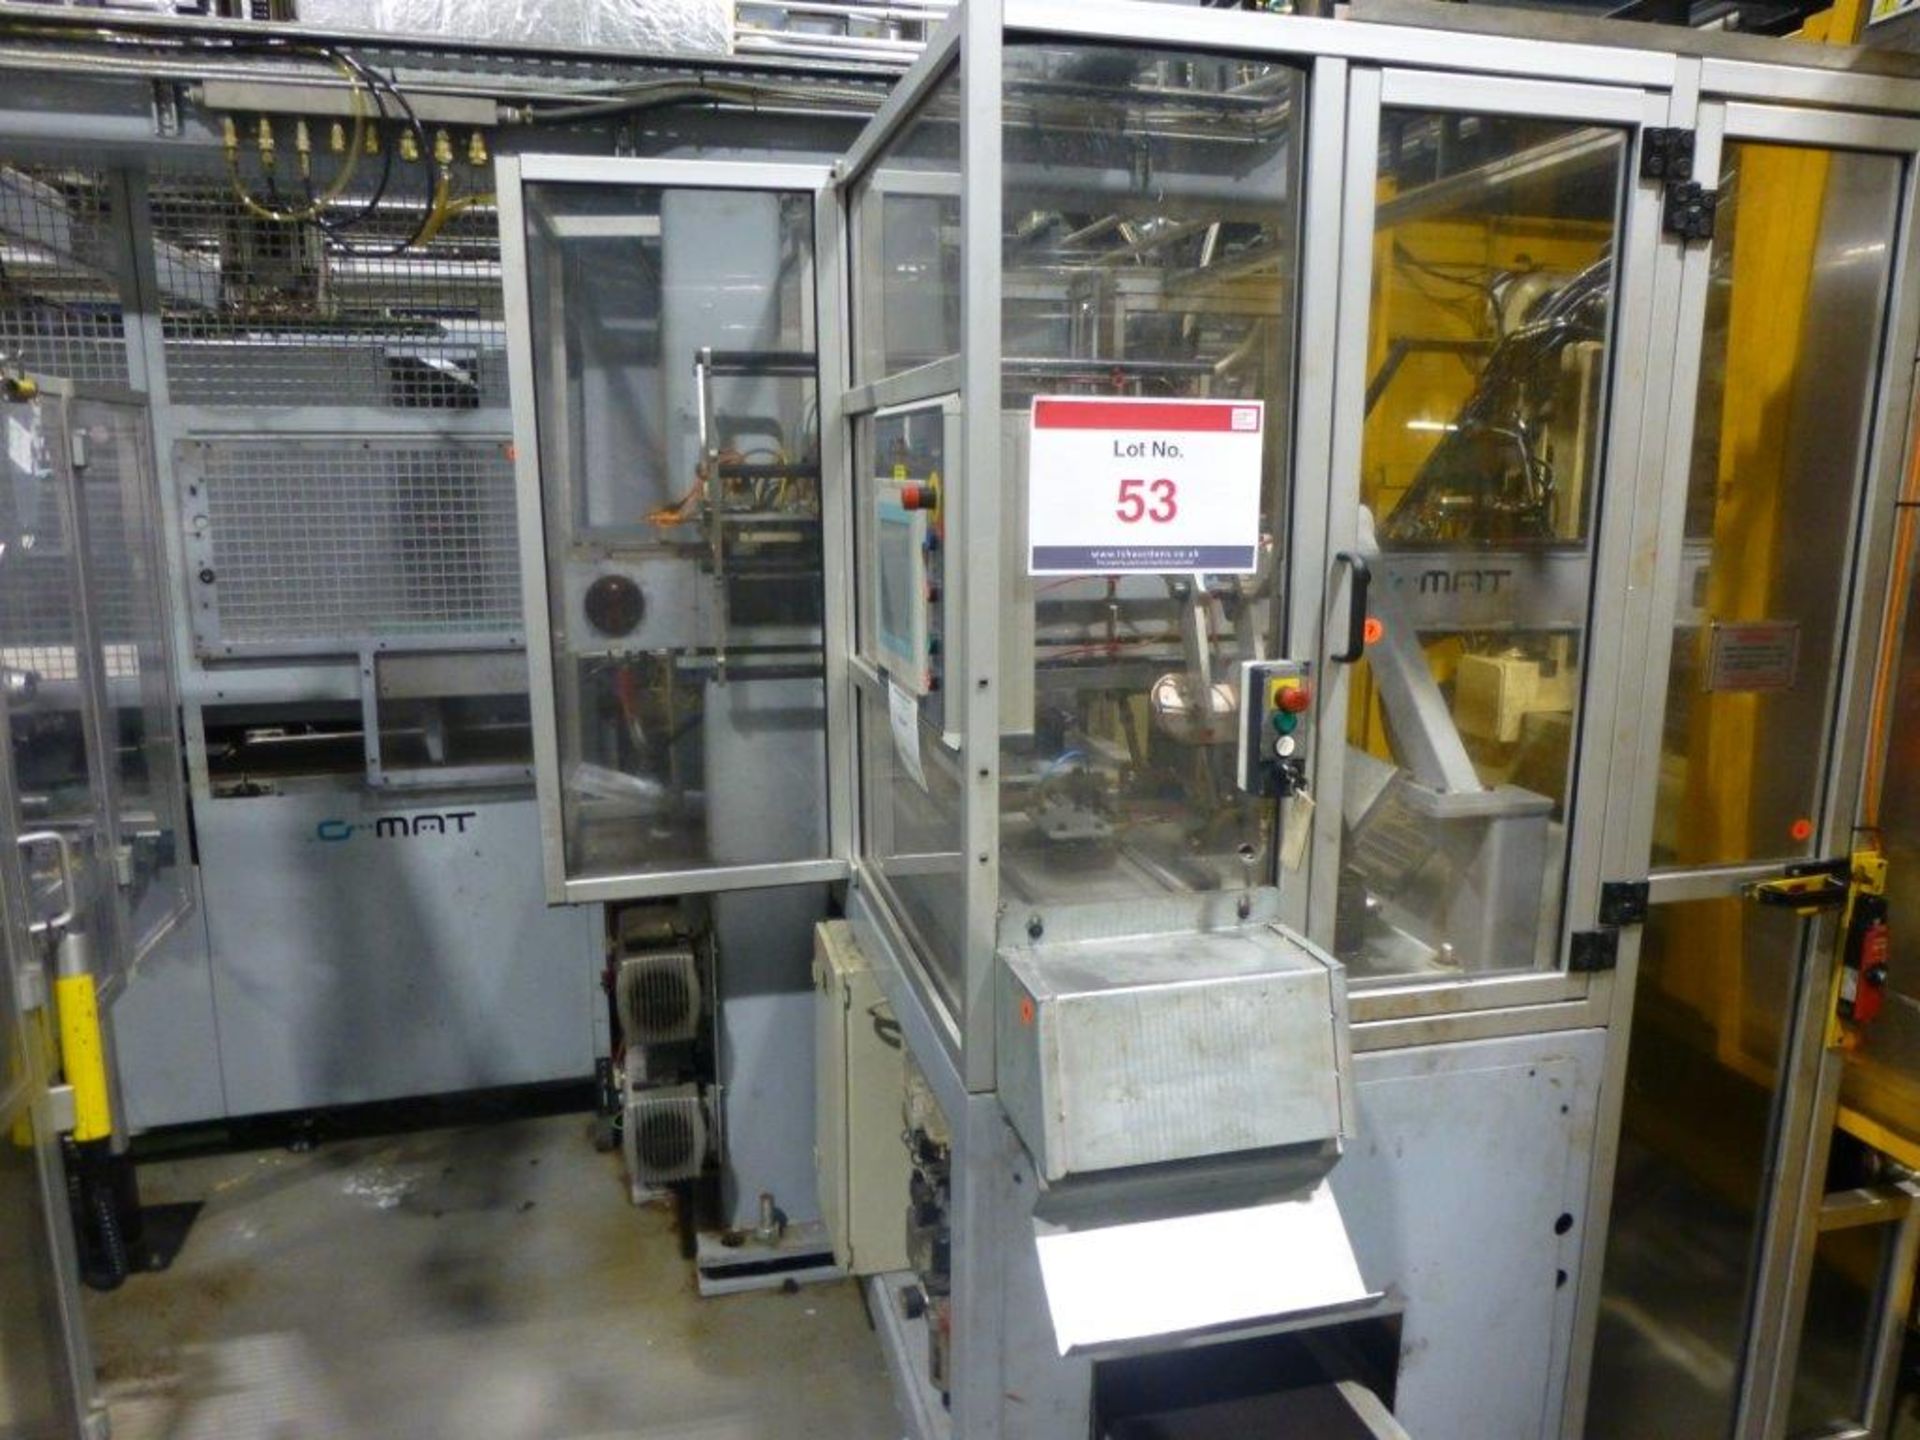 GMAT Model M85 CNC Traversing Pick & Place Robot, serial No. P112 Year of Manufacture 2003 with twin